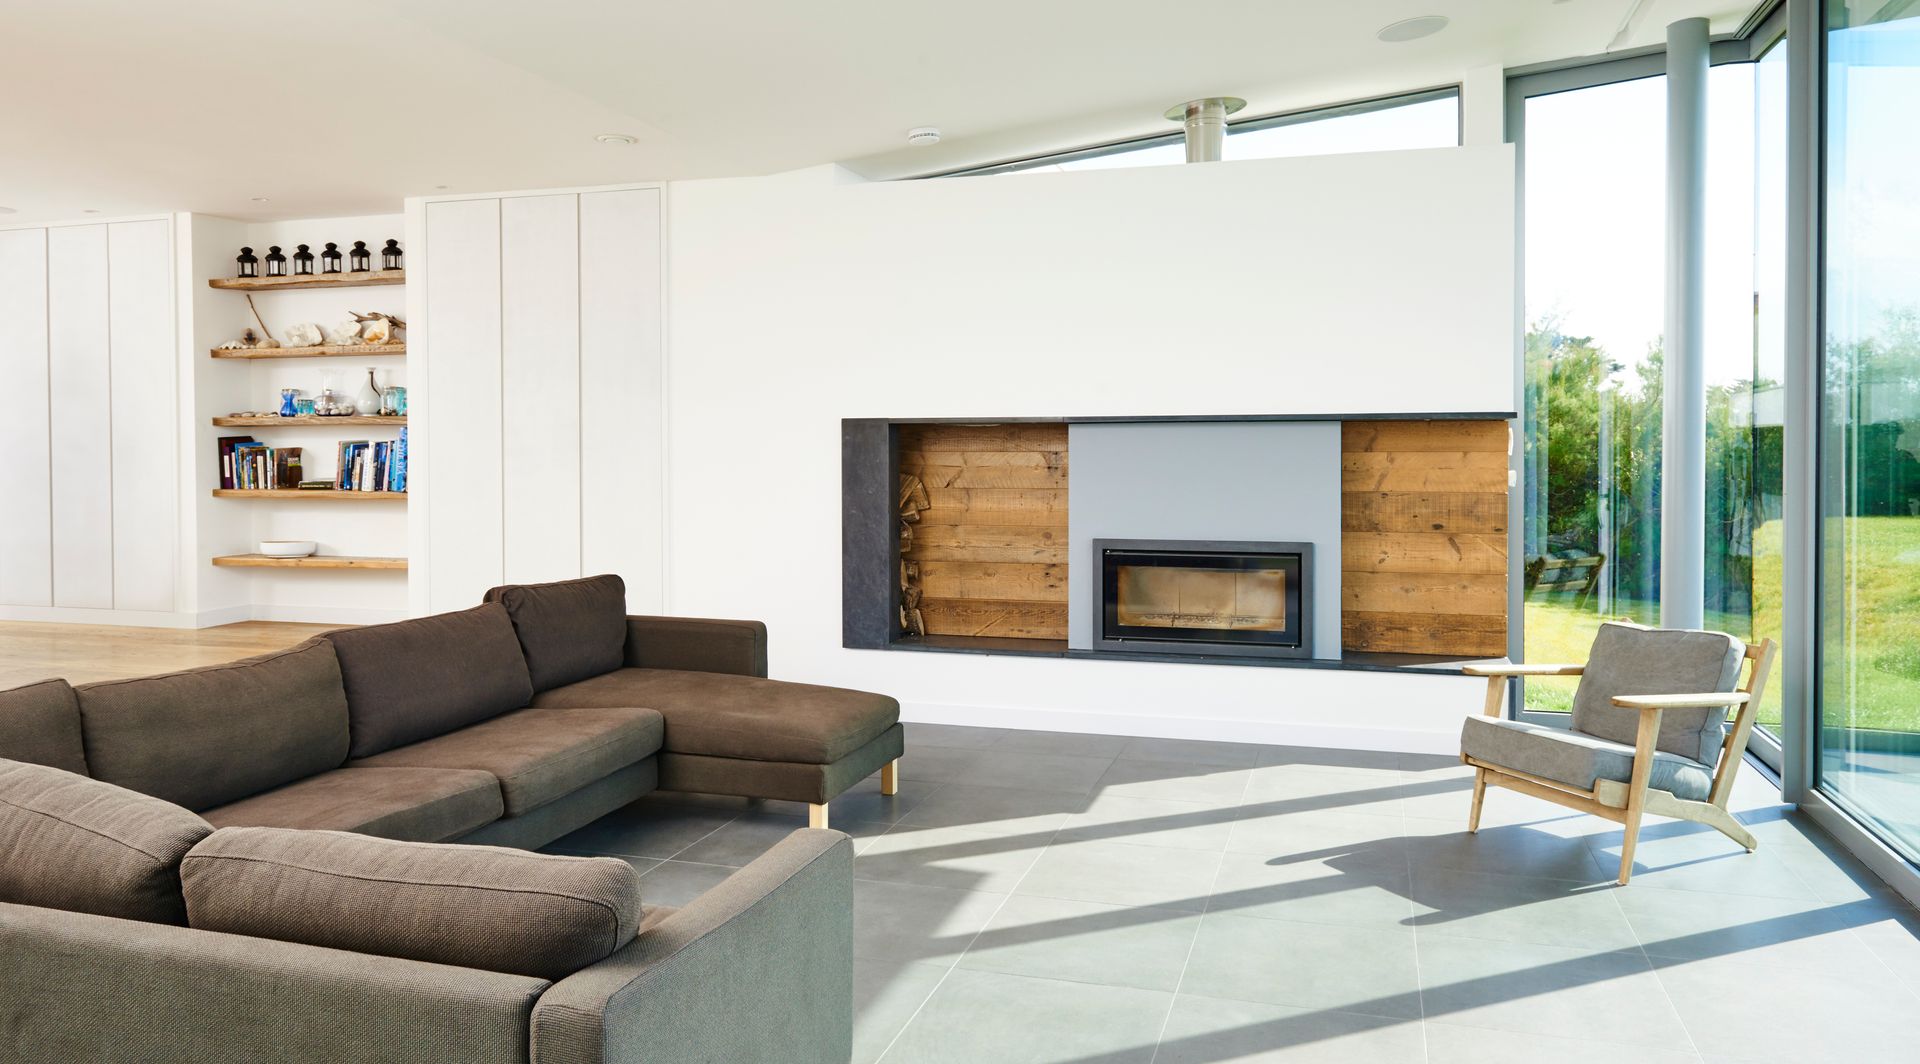 Sandhills Living Room and Fireplace Barc Architects Modern living room